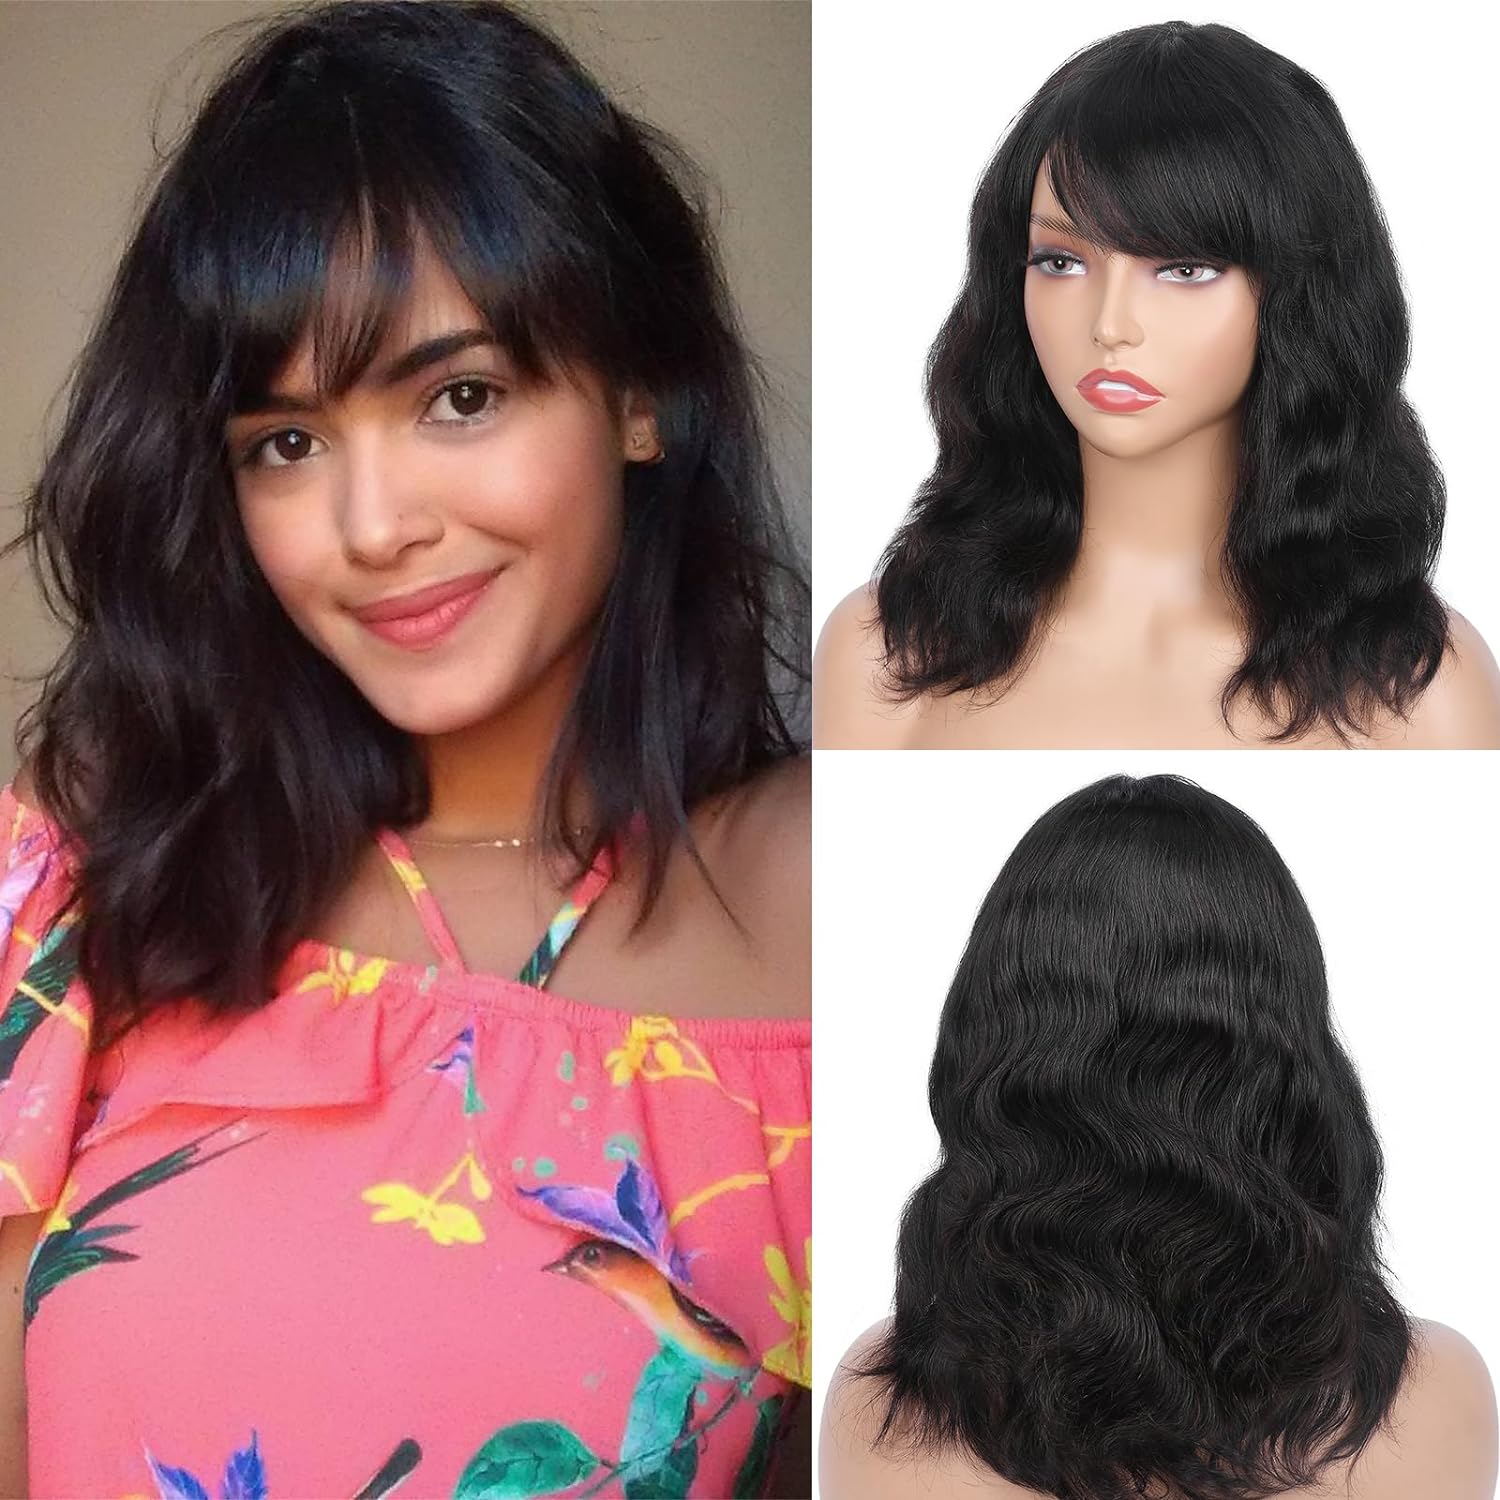 WIGNEE Natural Wavy Human Hair Wigs With Bangs Glueless Wigs Human Hair Lace Fro